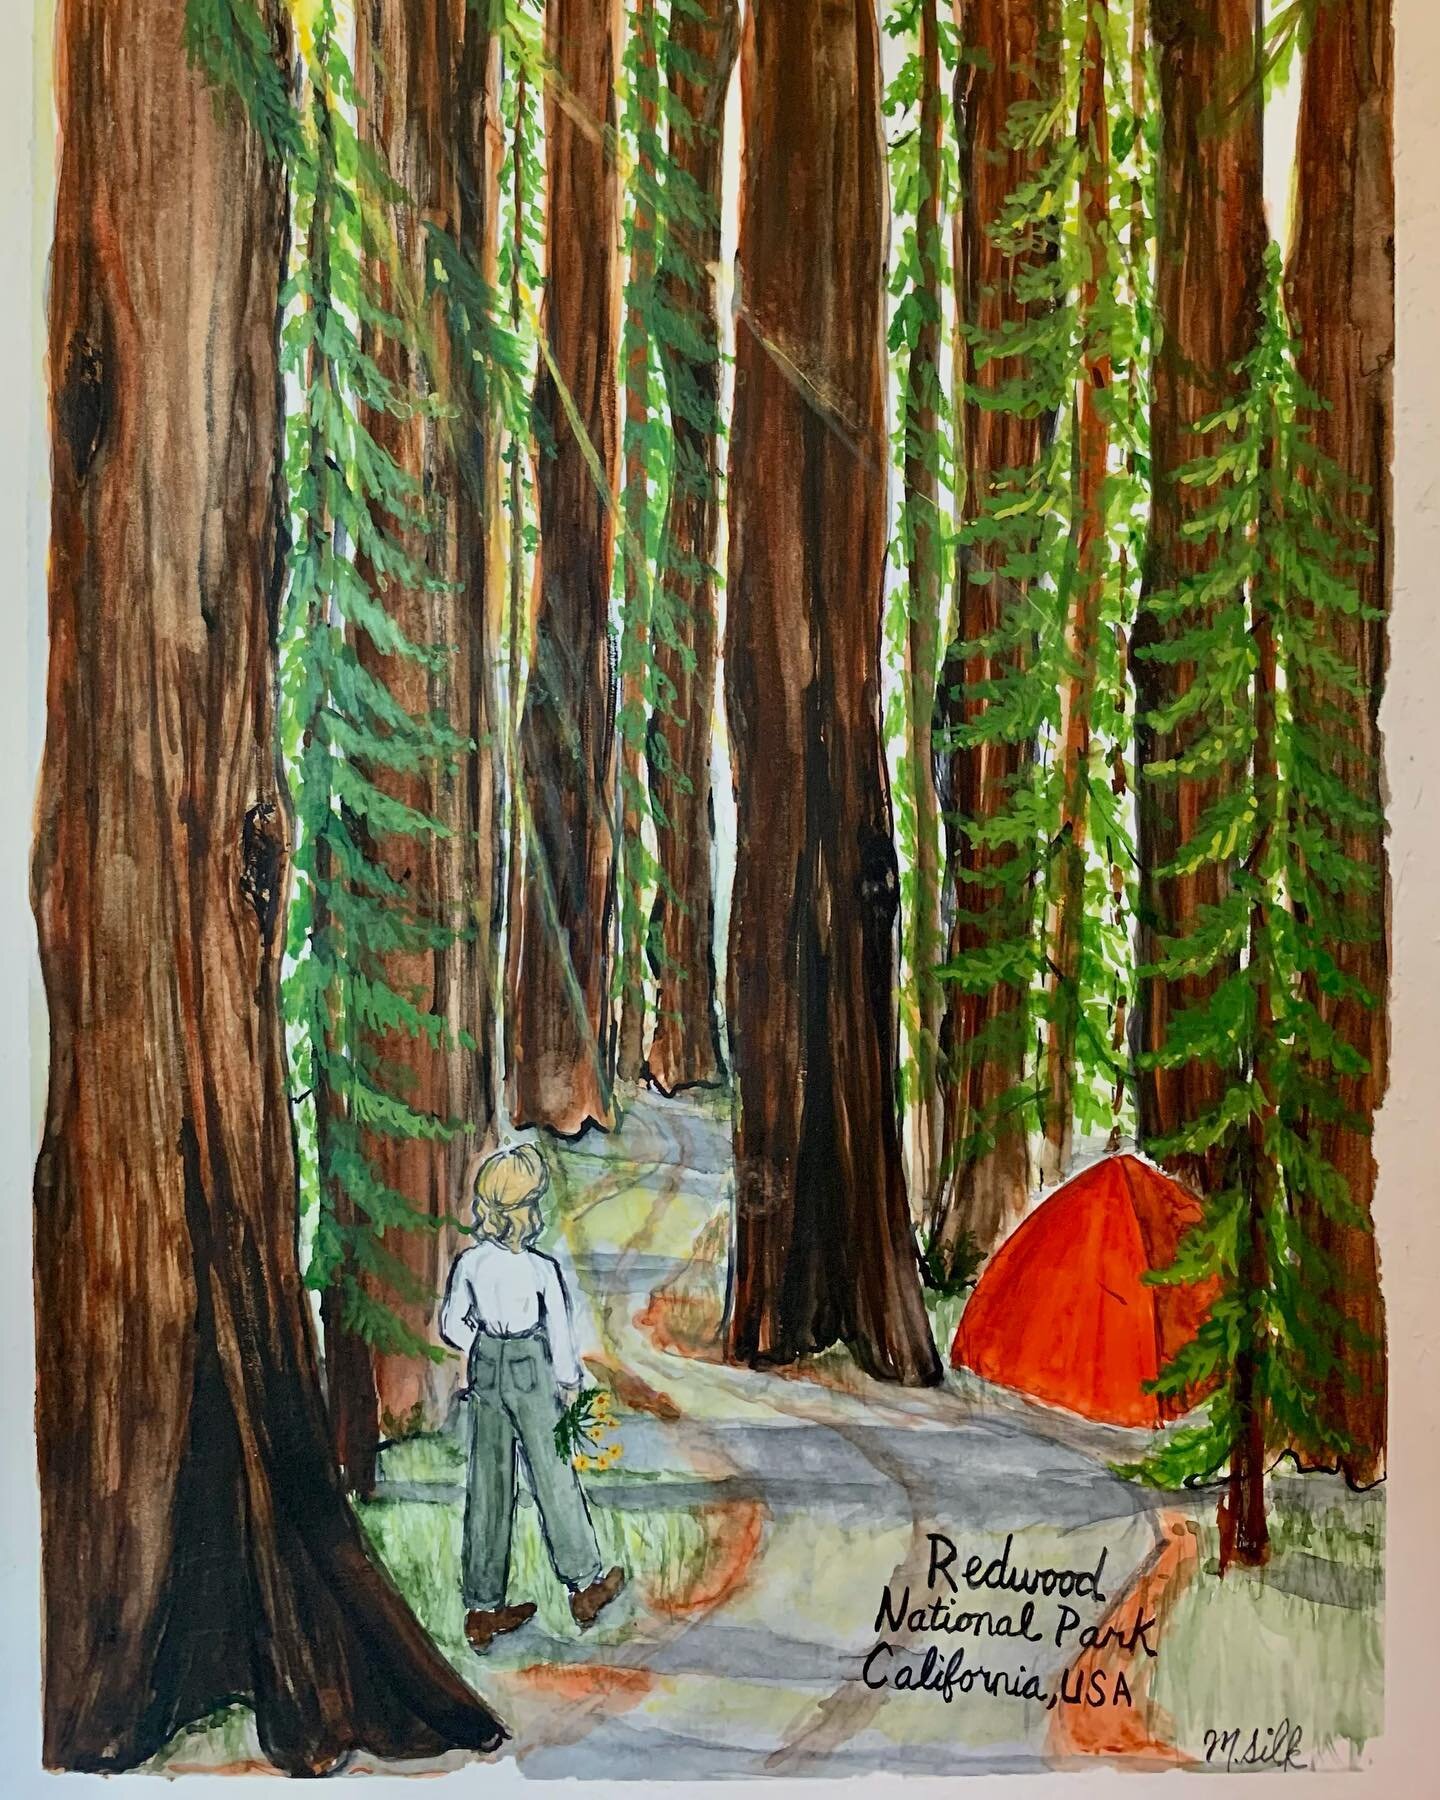 Redwoods National Park ✨ Love drawing the national parks, this is the third one I&rsquo;ve done and all three prints will be available at the next market! #fentonsillustrations #illustration #watercolor #nationalparks #redwoods #redwoodsnationalpark 